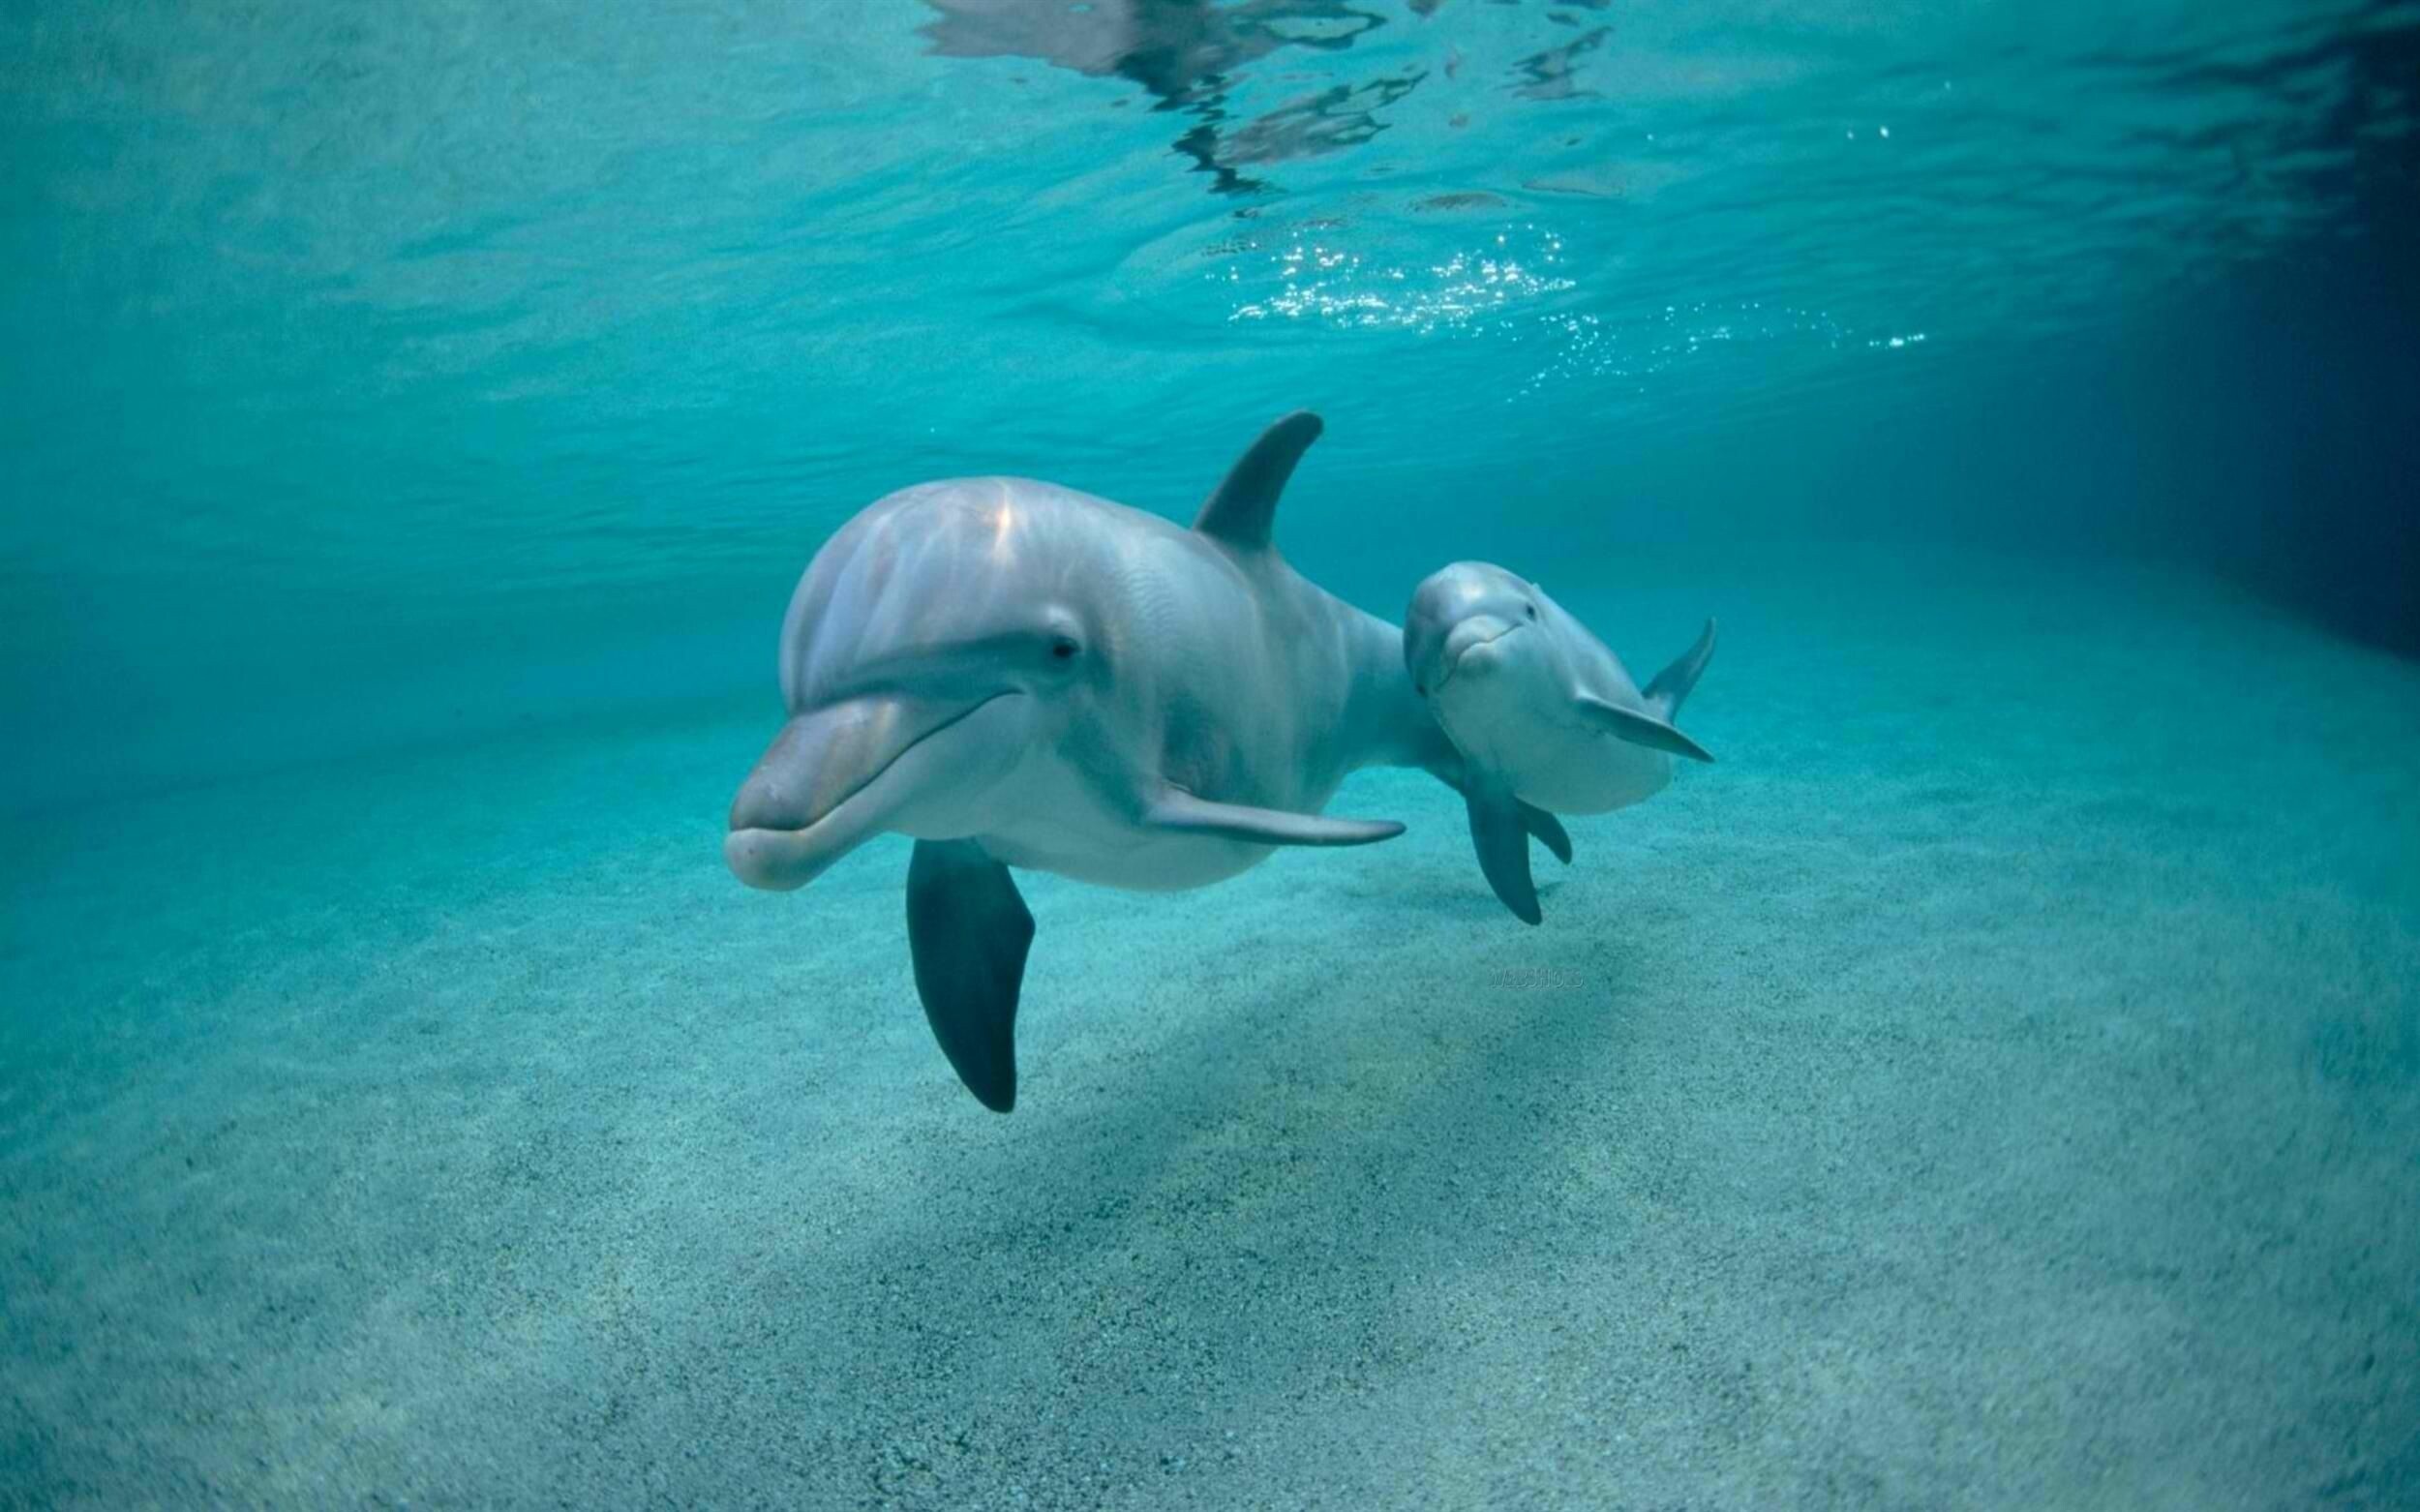 Baby dolphin wallpapers, HD and 4K images, Mobile backgrounds, Dolphin-themed wallpapers, 2500x1570 HD Desktop